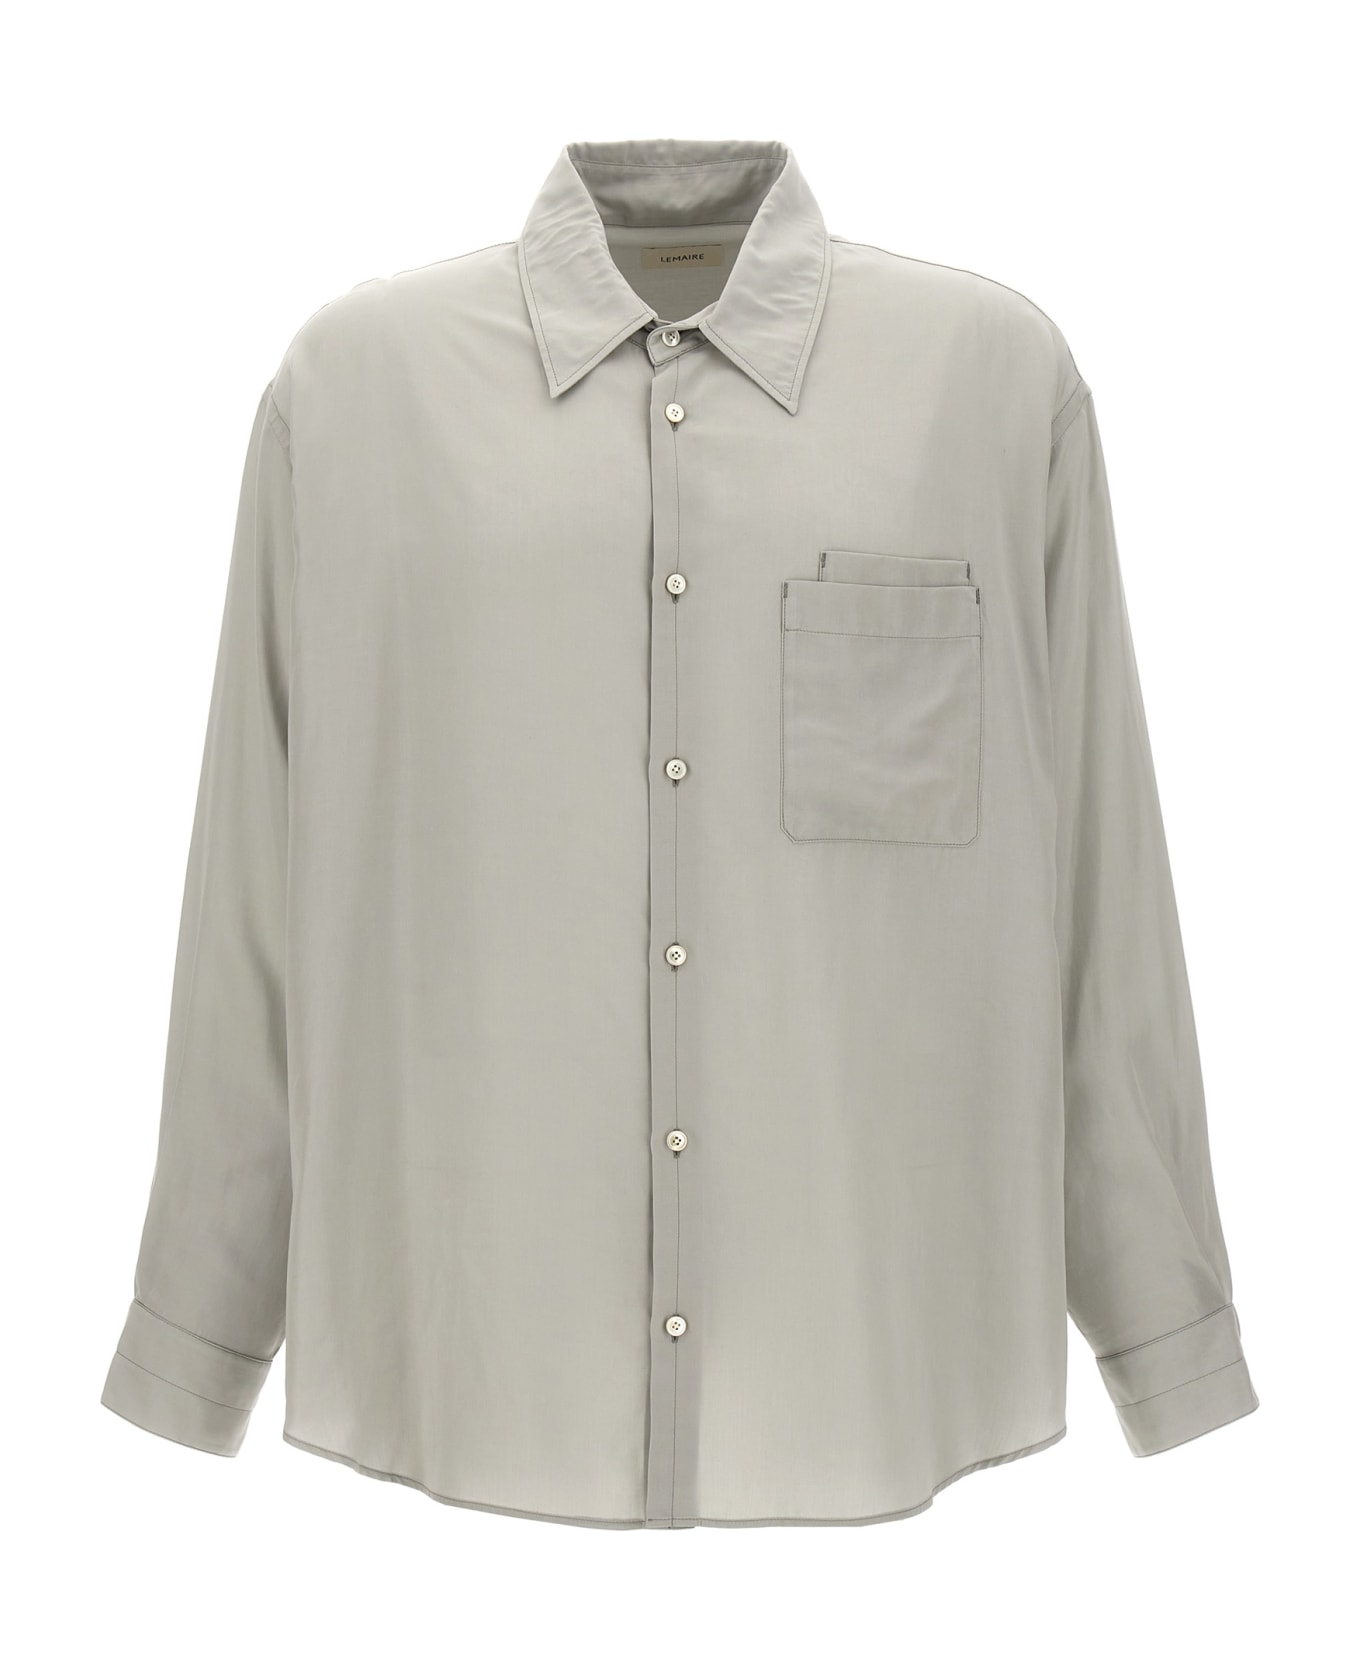 Lemaire 'double Pocket' Shirt - Gray